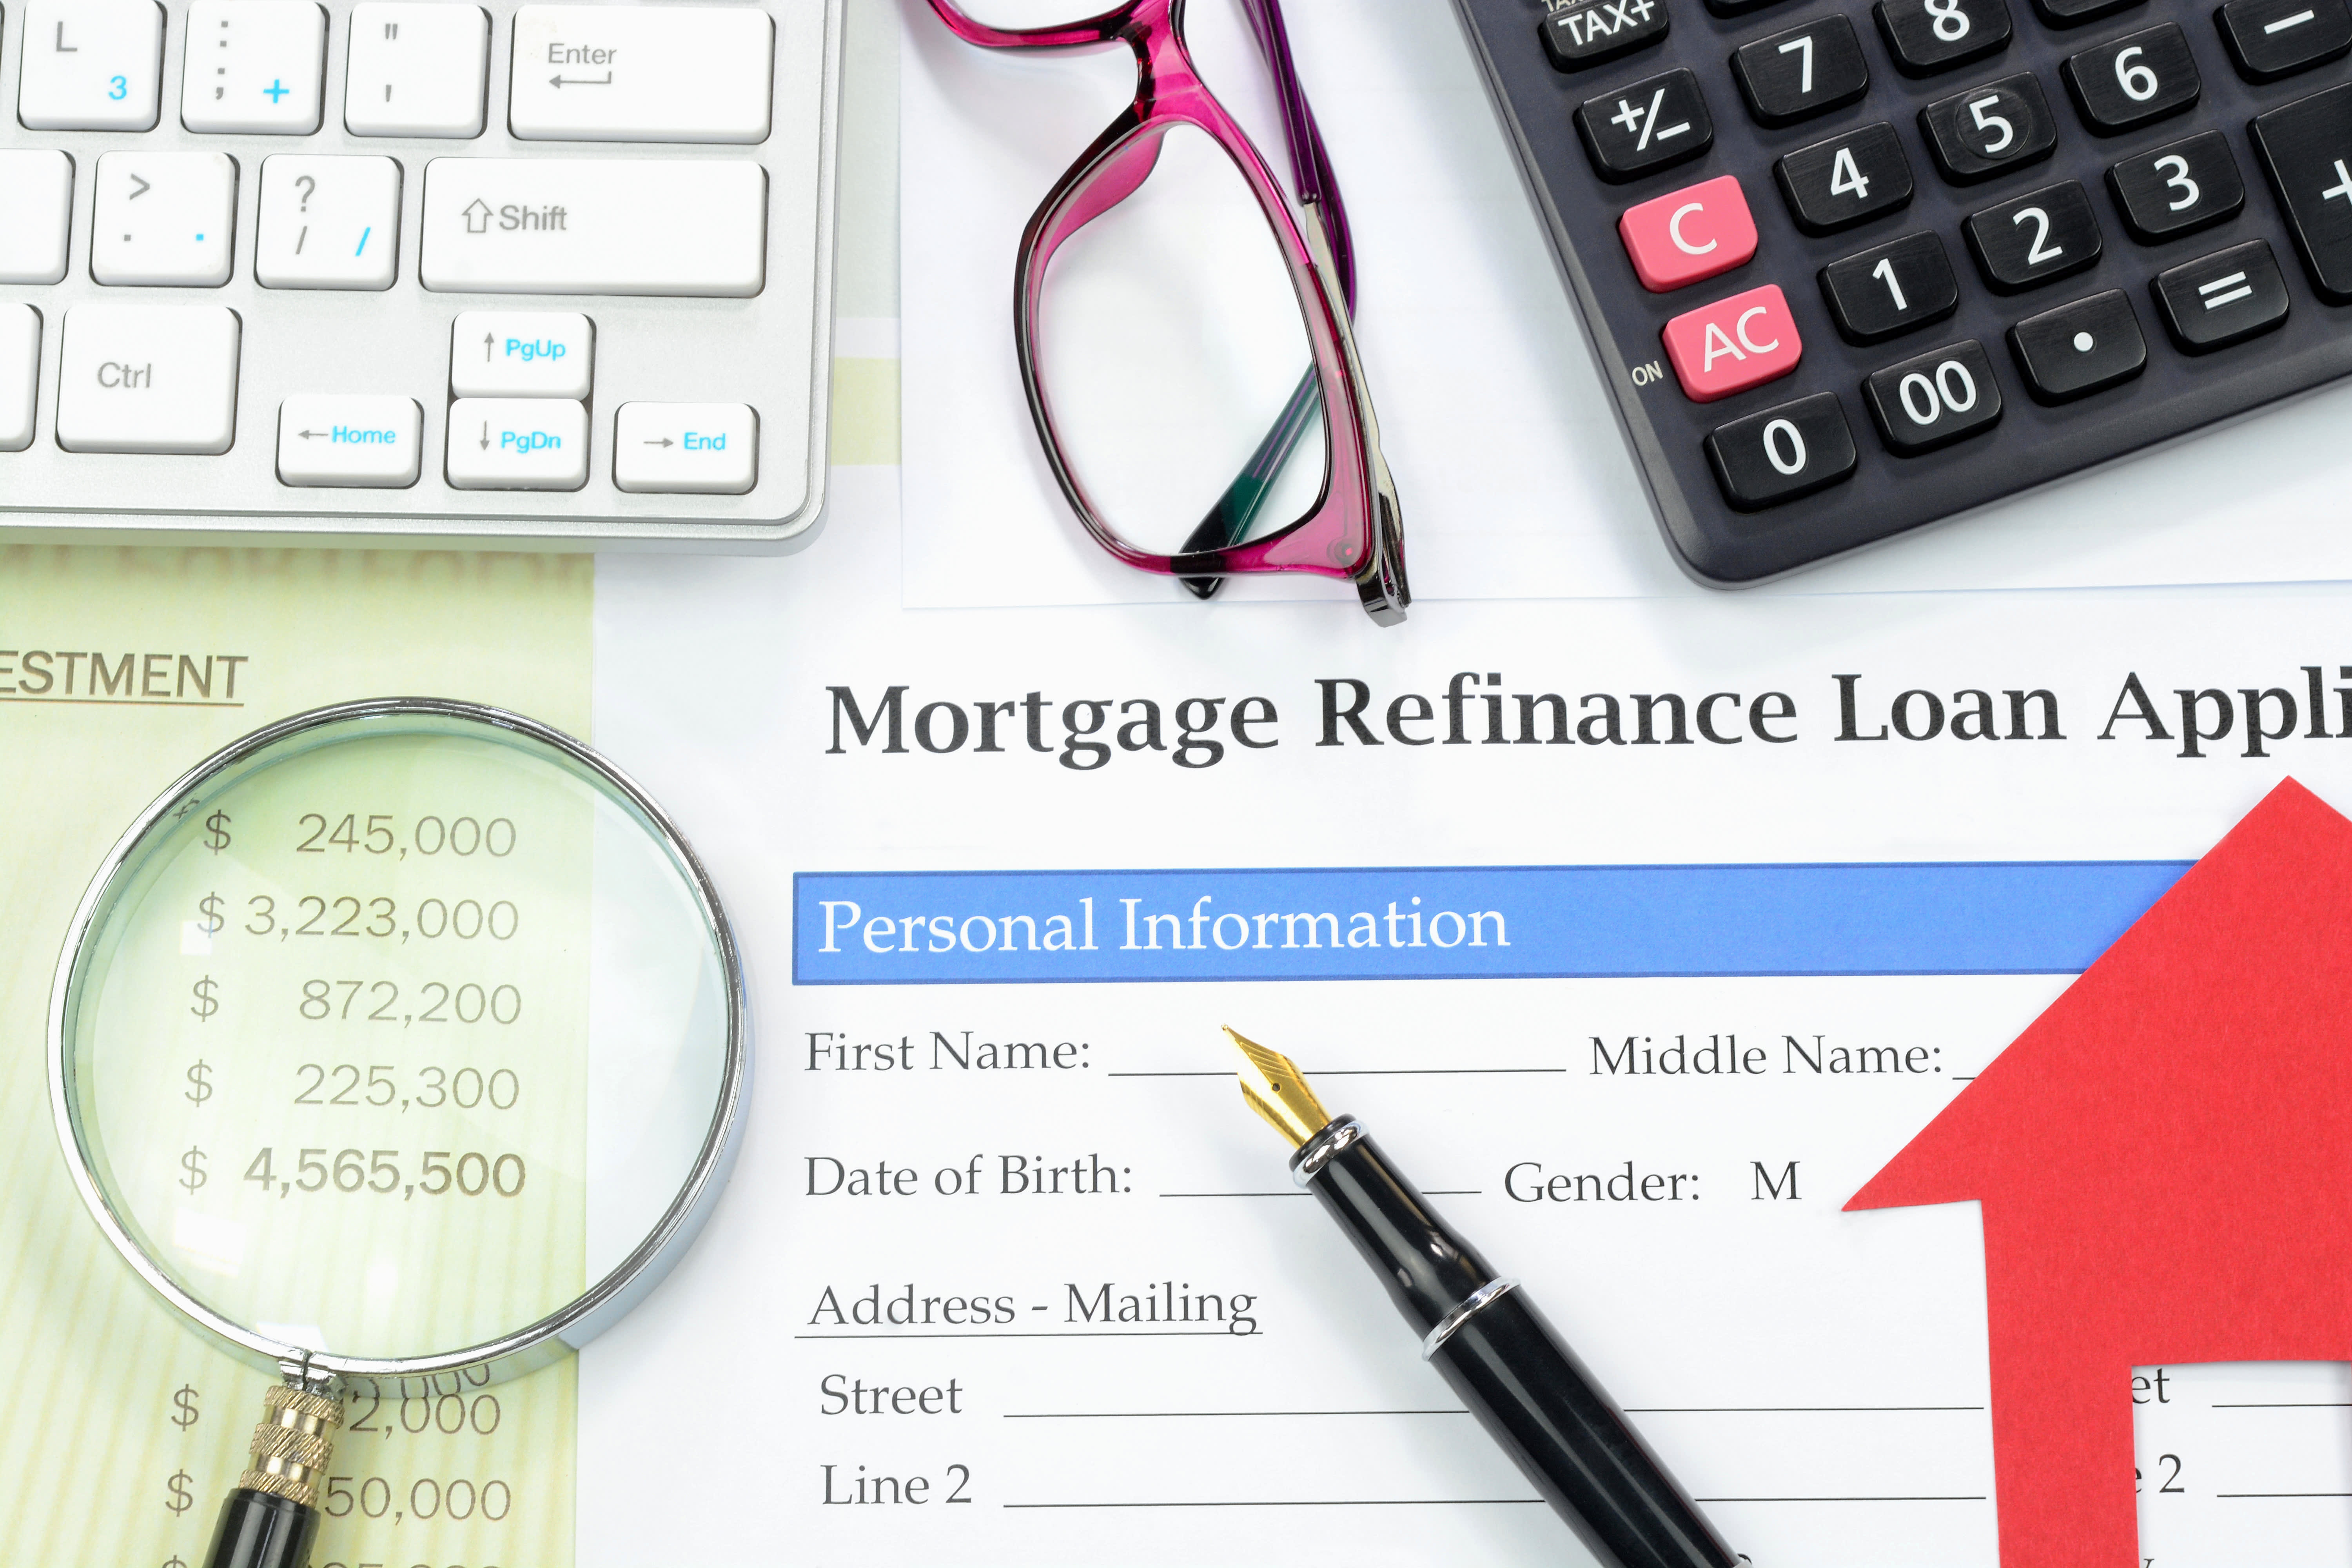 Mortgage refinance: Millions of borrowers just missed their chance to save 